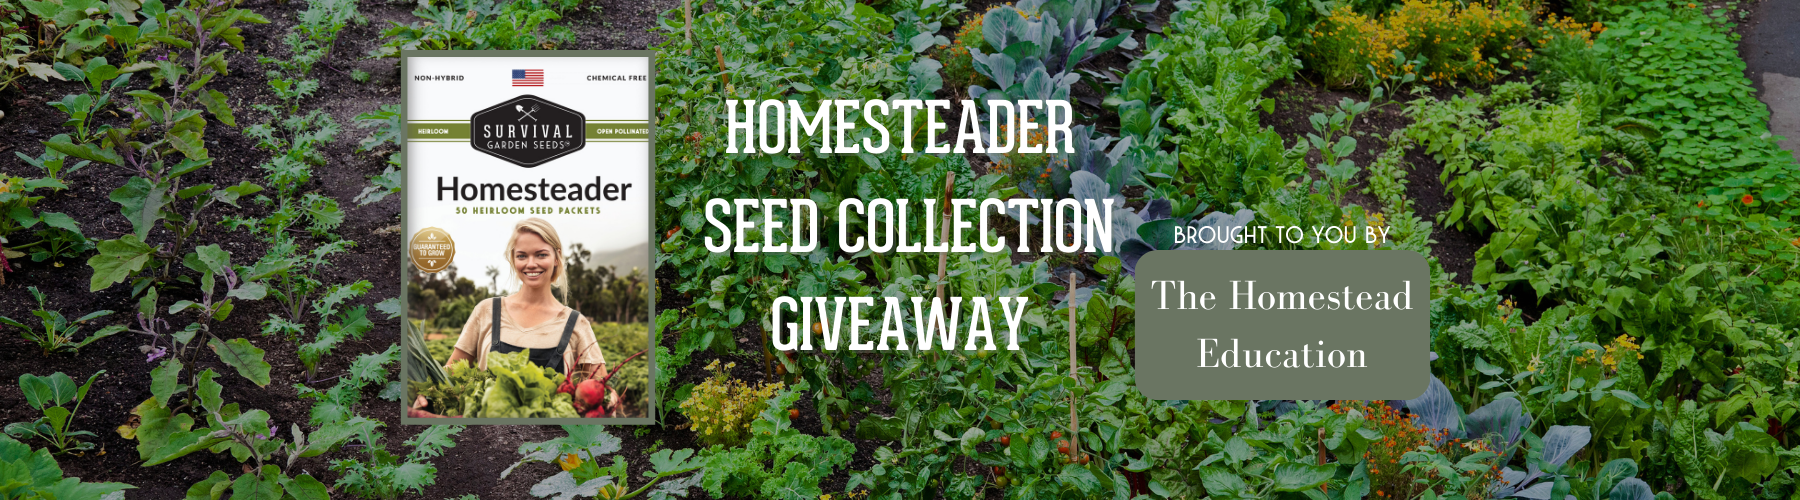 The Homestead Education Homesteader Seed Collection Giveaway